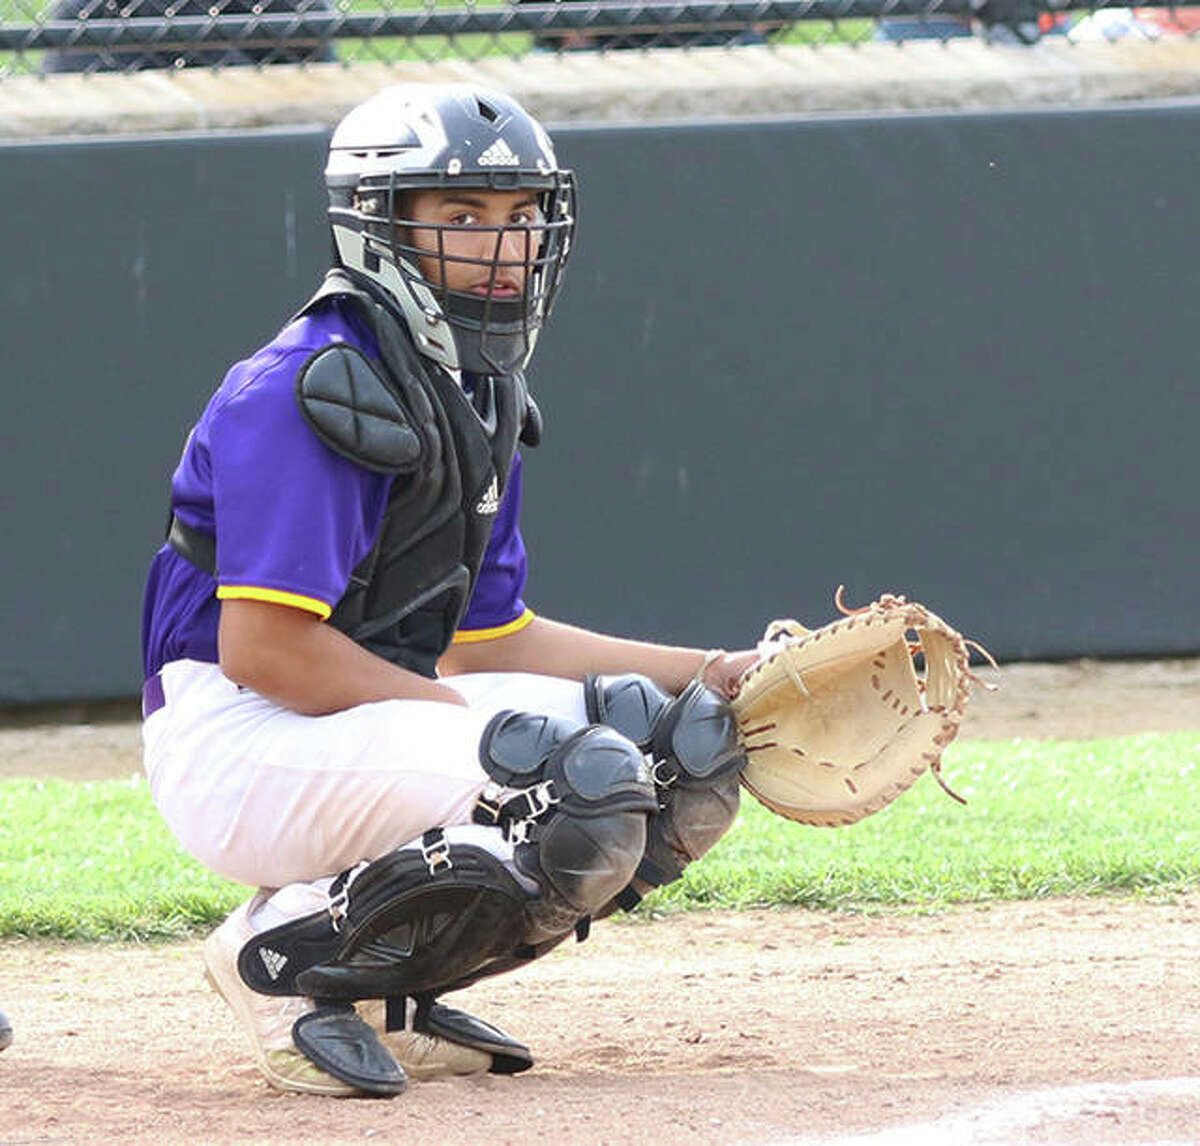 CM catcher Miguel Gonzalez had two hits in the Eagles’ Class 3A regional loss Friday at Highland.